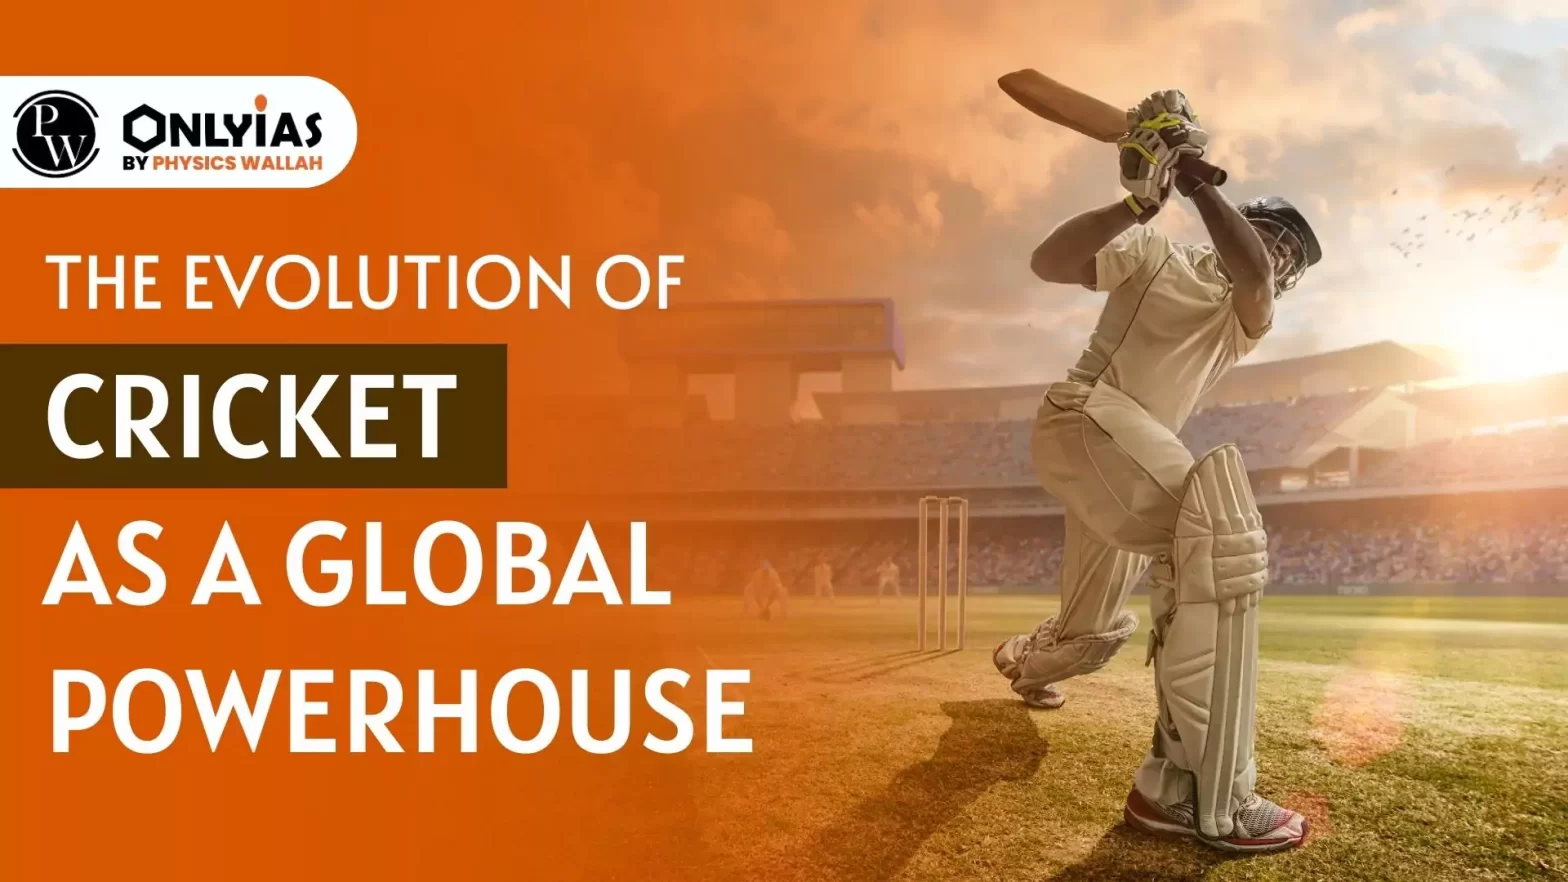 The Evolution of Cricket As a Global Powerhouse